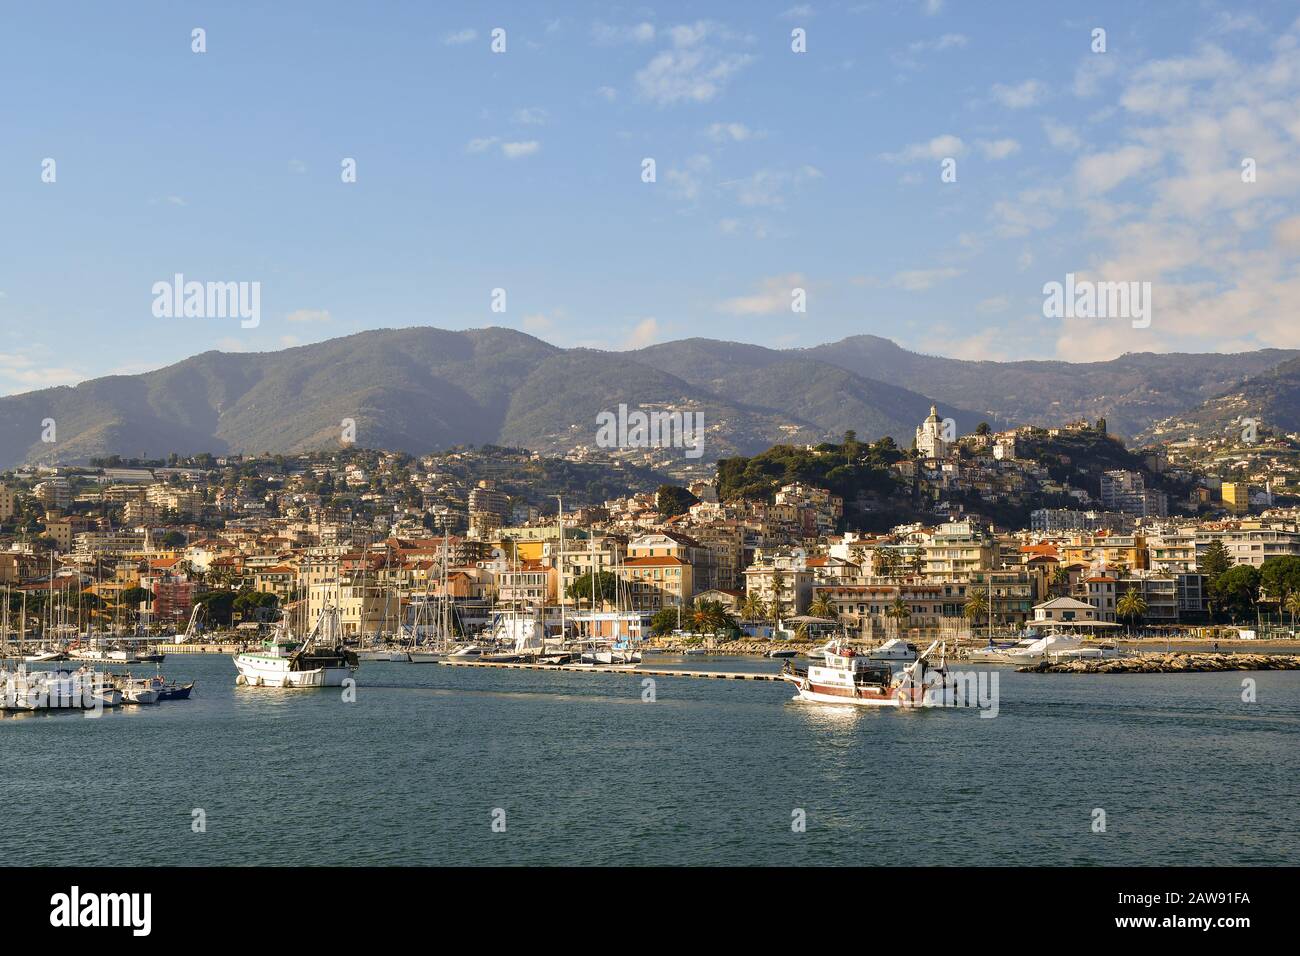 Scenic view of the Old Port of Sanremo with fishing boats and the coastal city with the Ligurian Apennines in background, Sanremo, Liguria, Italy Stock Photo